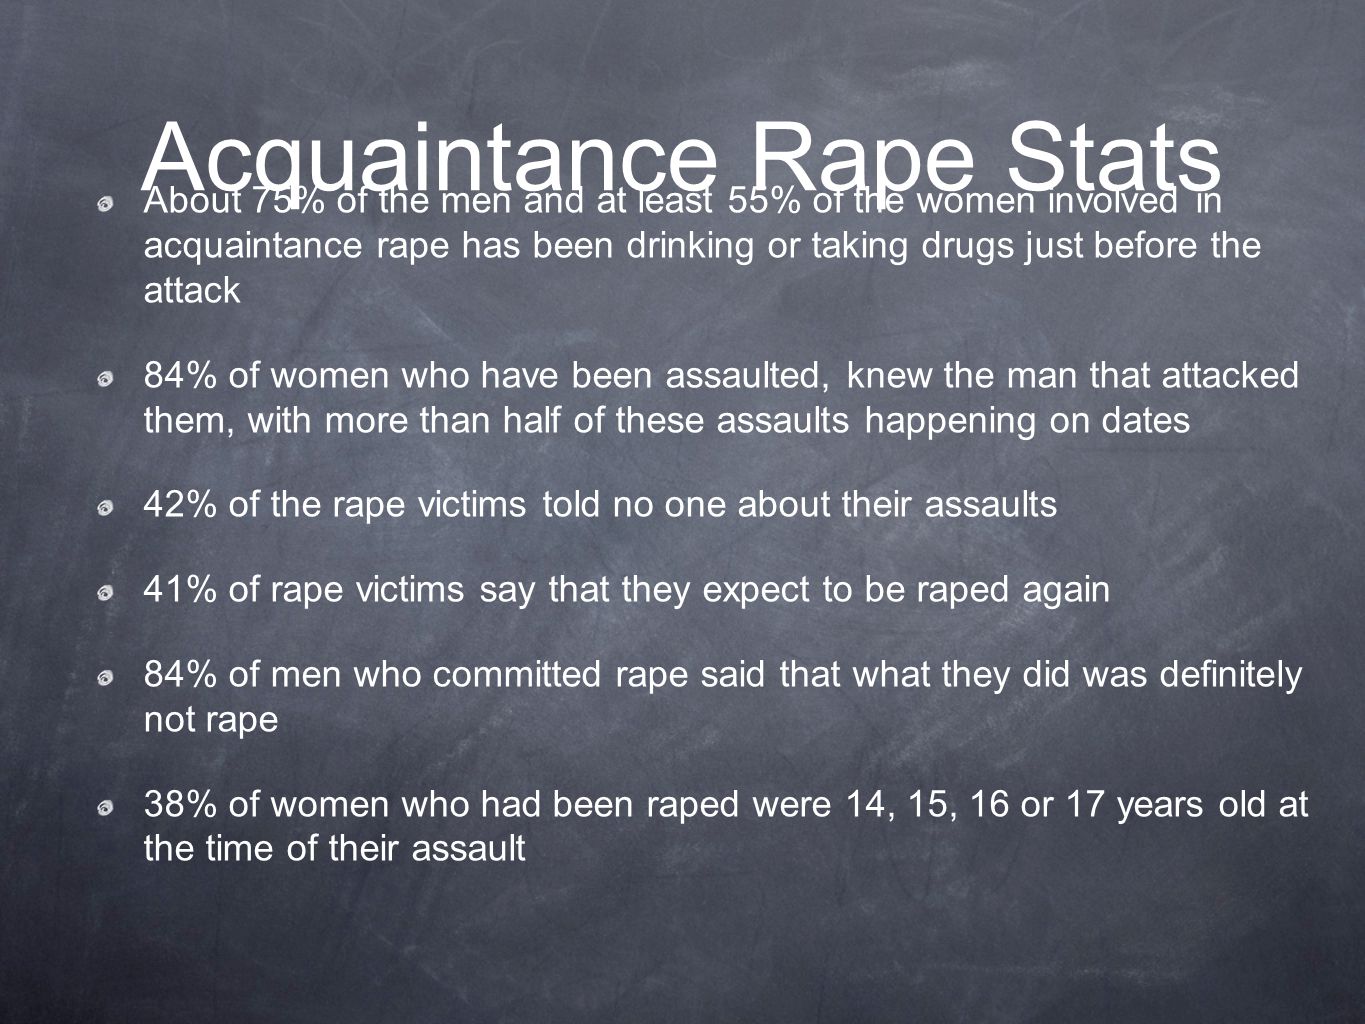 Acquaintance Rape Stats About 75% of the men and at least 55% of the women involved in acquaintance rape has been drinking or taking drugs just before the attack 84% of women who have been assaulted, knew the man that attacked them, with more than half of these assaults happening on dates 42% of the rape victims told no one about their assaults 41% of rape victims say that they expect to be raped again 84% of men who committed rape said that what they did was definitely not rape 38% of women who had been raped were 14, 15, 16 or 17 years old at the time of their assault